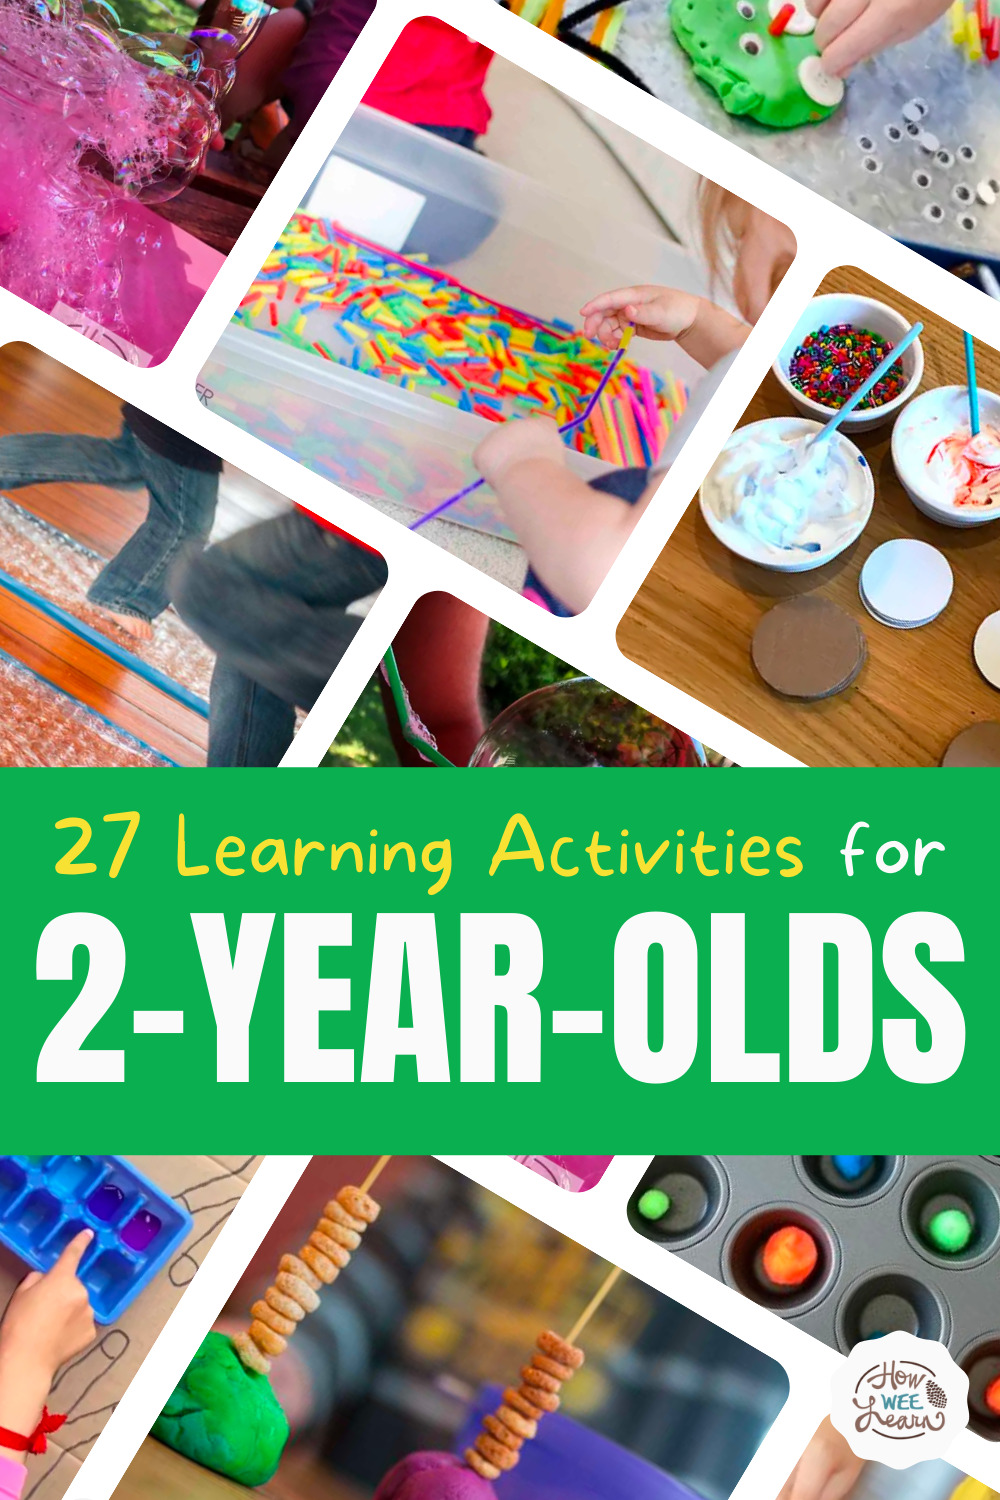 27 Learning Activities for 2-Year-Olds